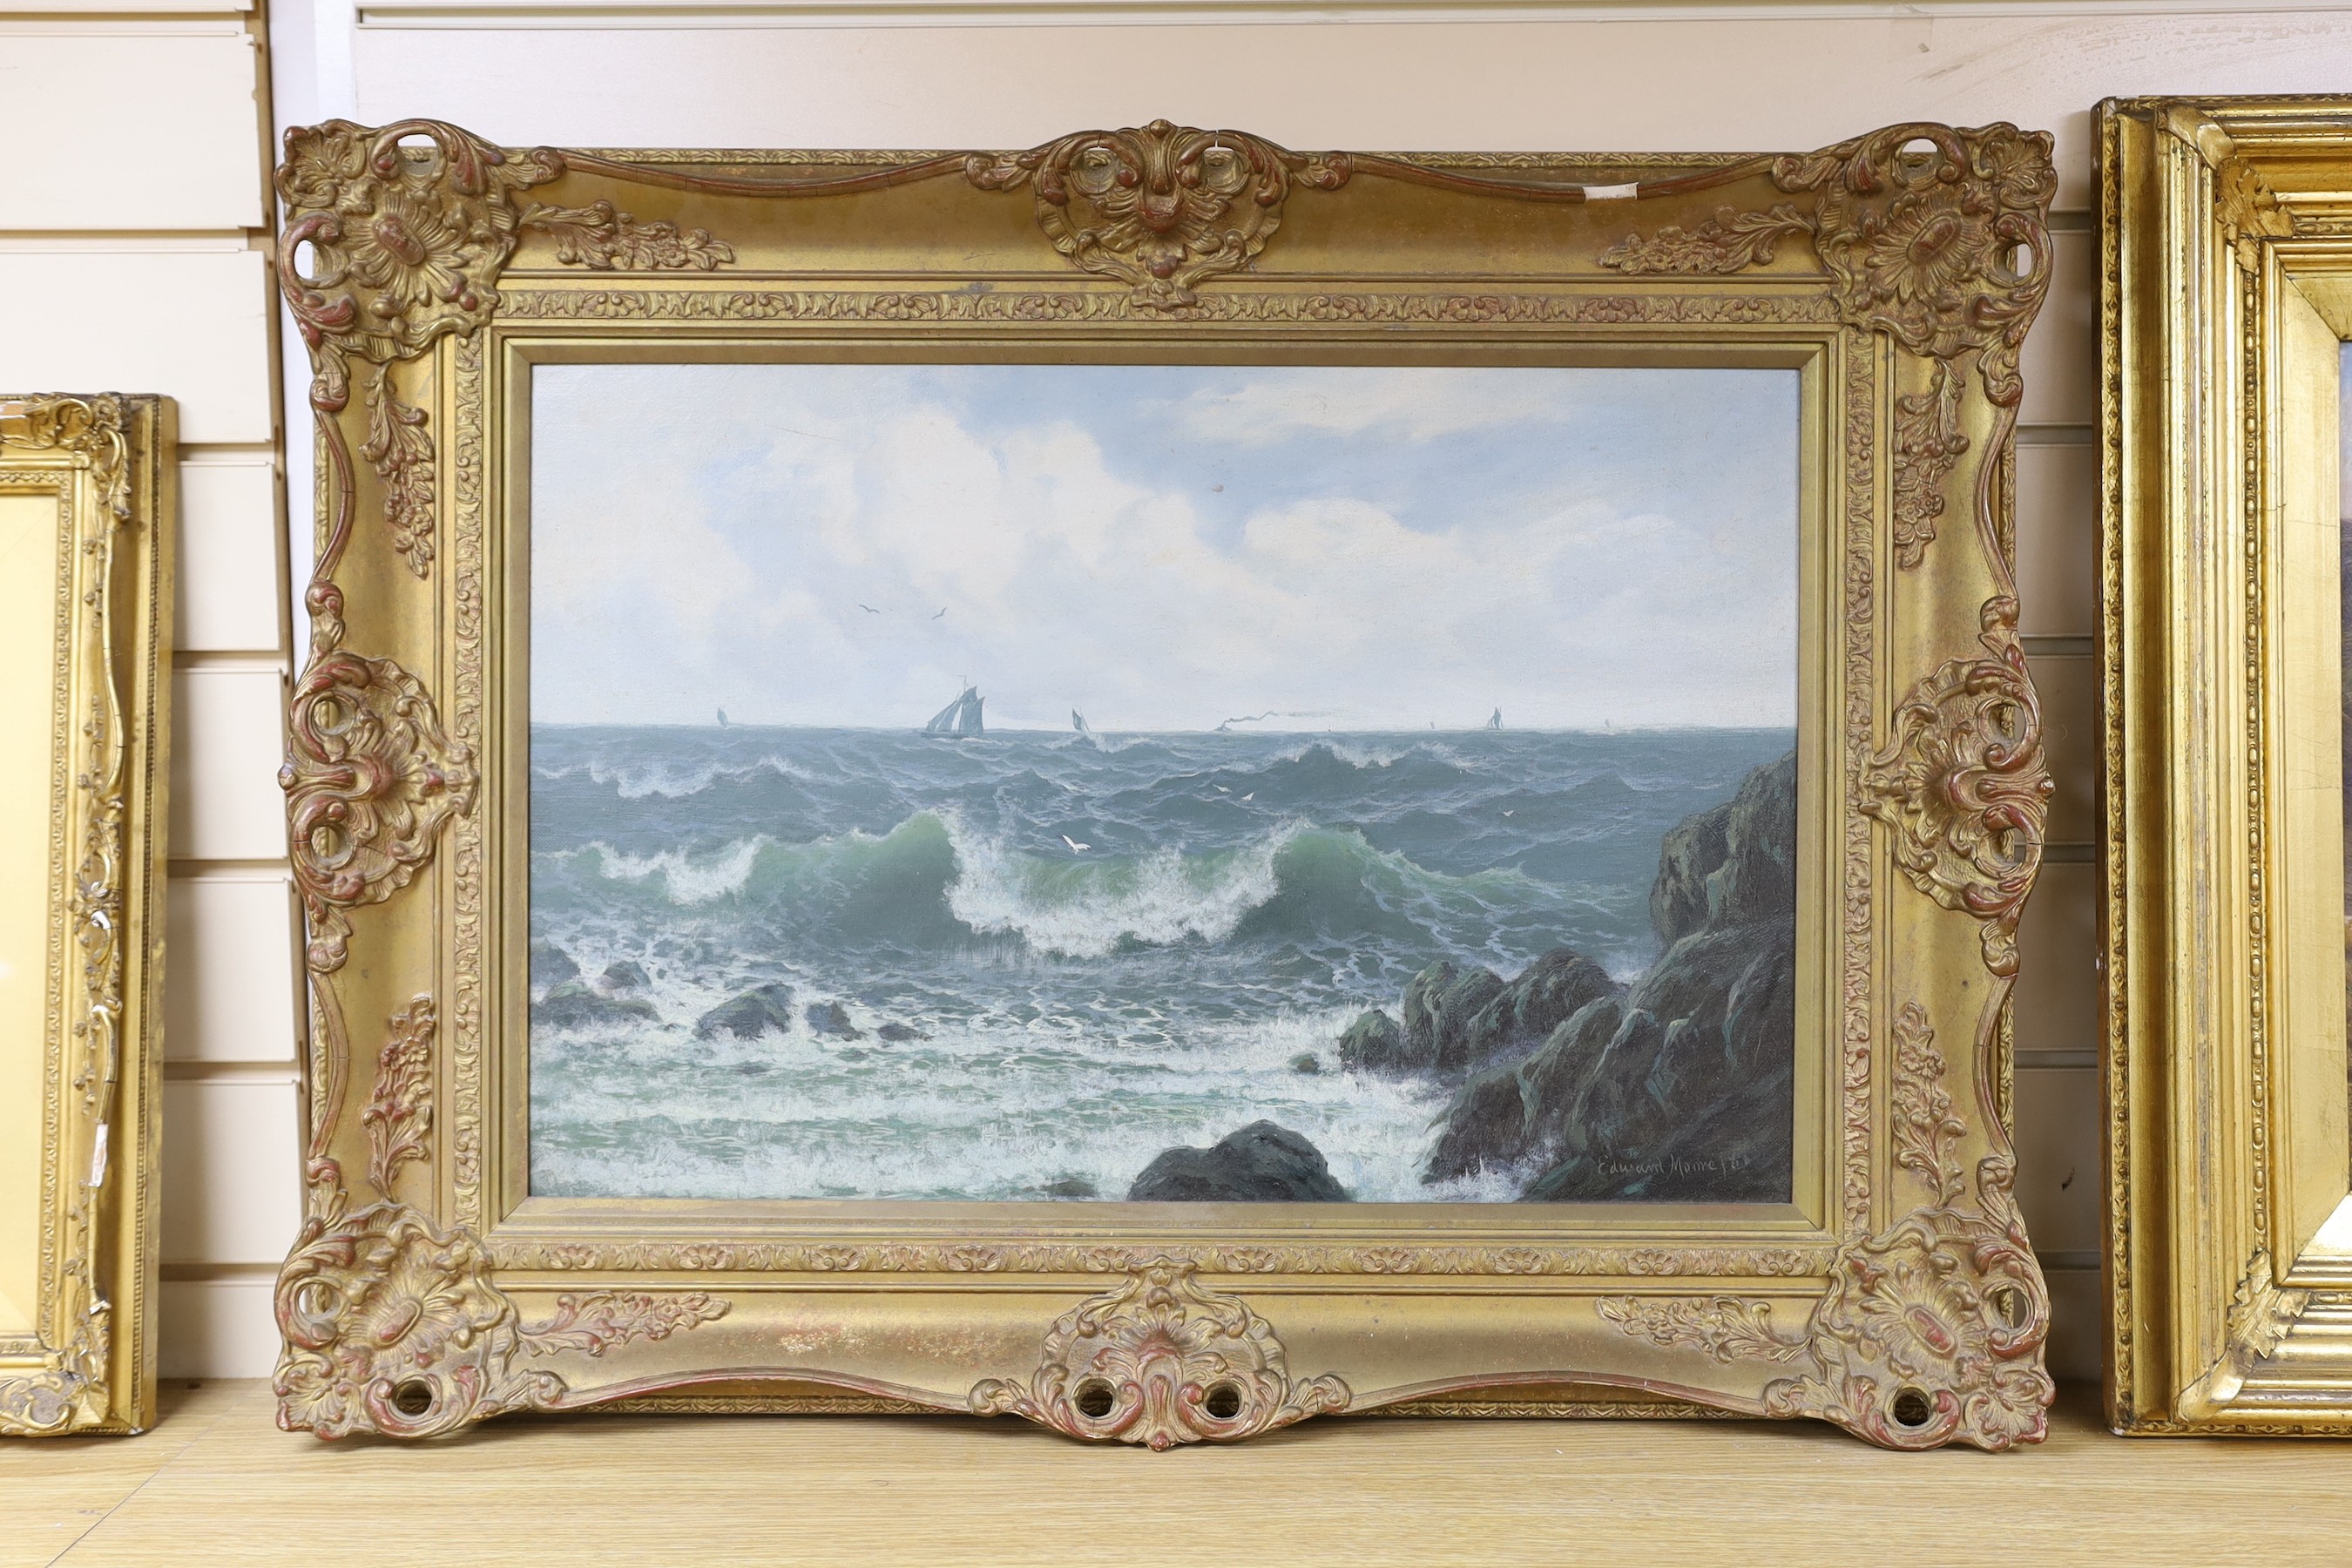 Edward Moore, oil on canvas, Shipping off the coast, signed and dated '86, 40 x 59cm